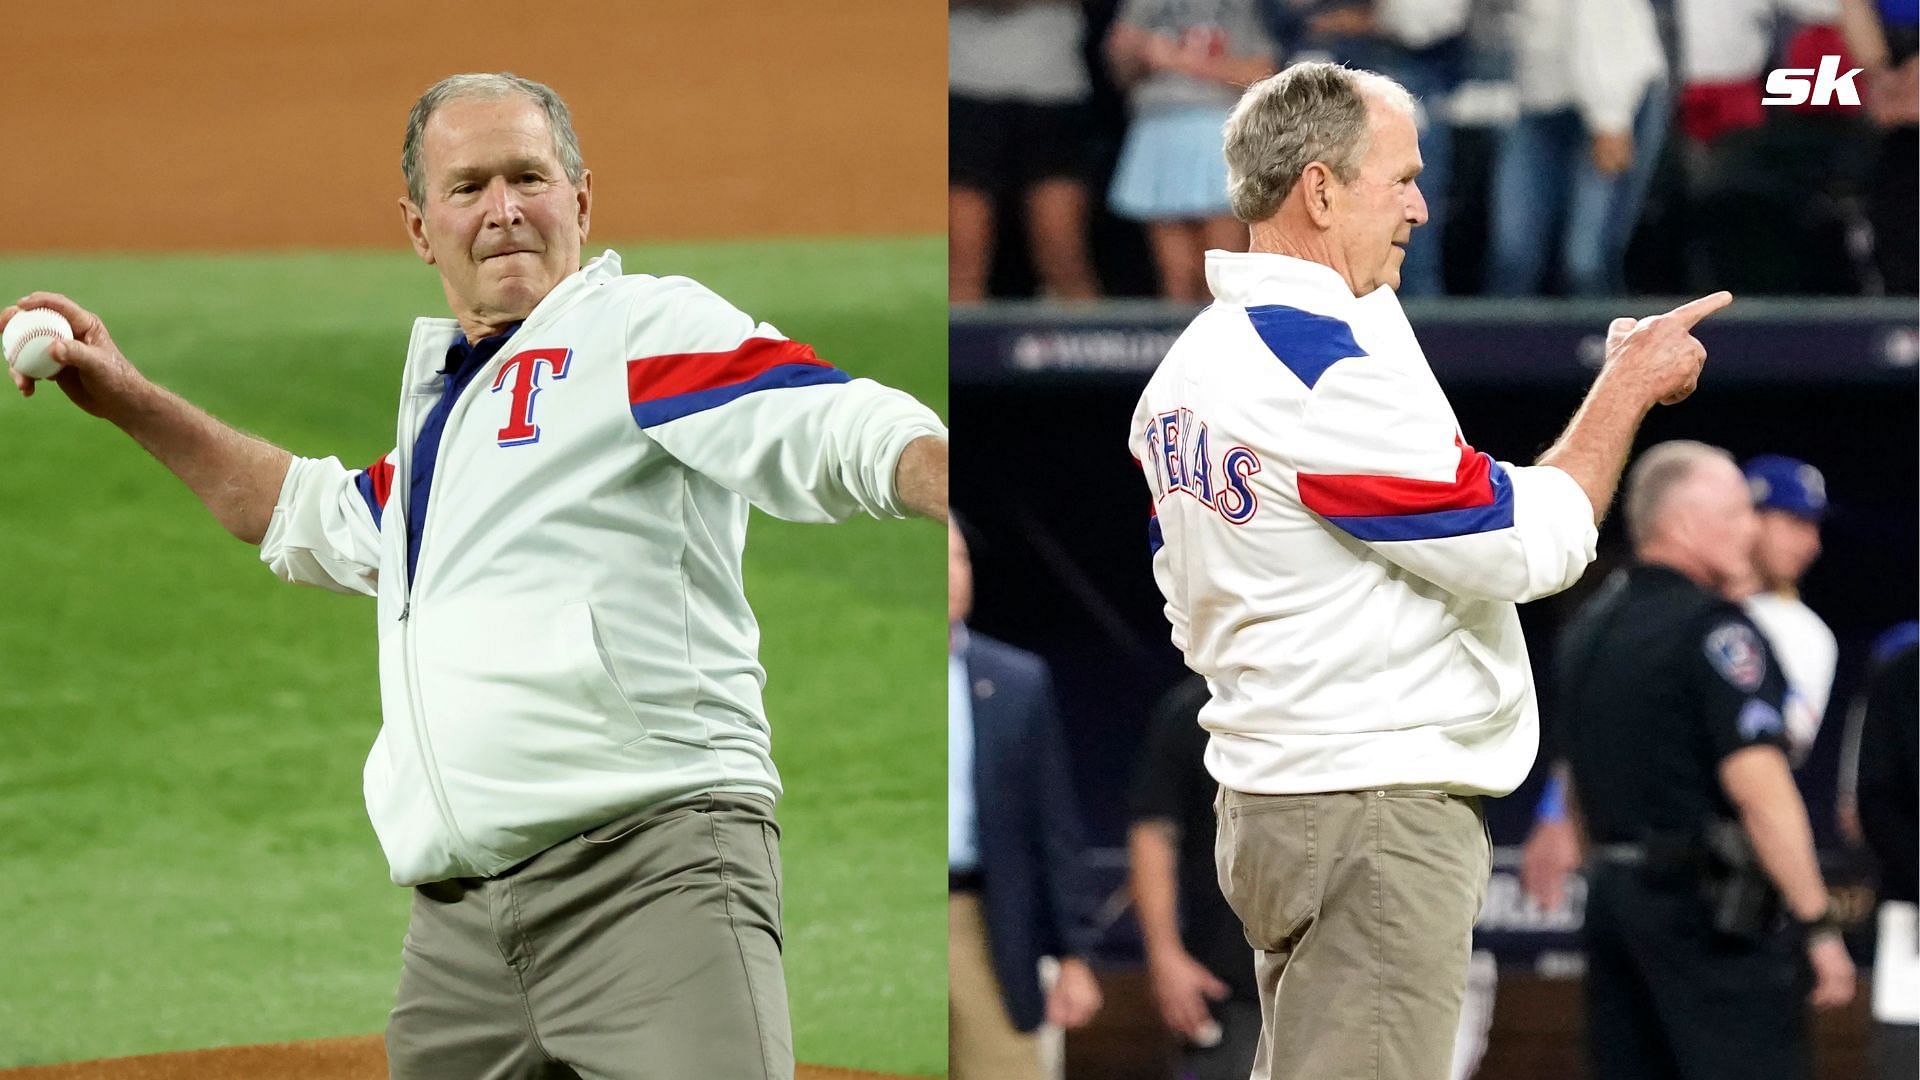 WATCH: Former President George W. Bush visits Globe Life Field for matchup between Reds and Rangers